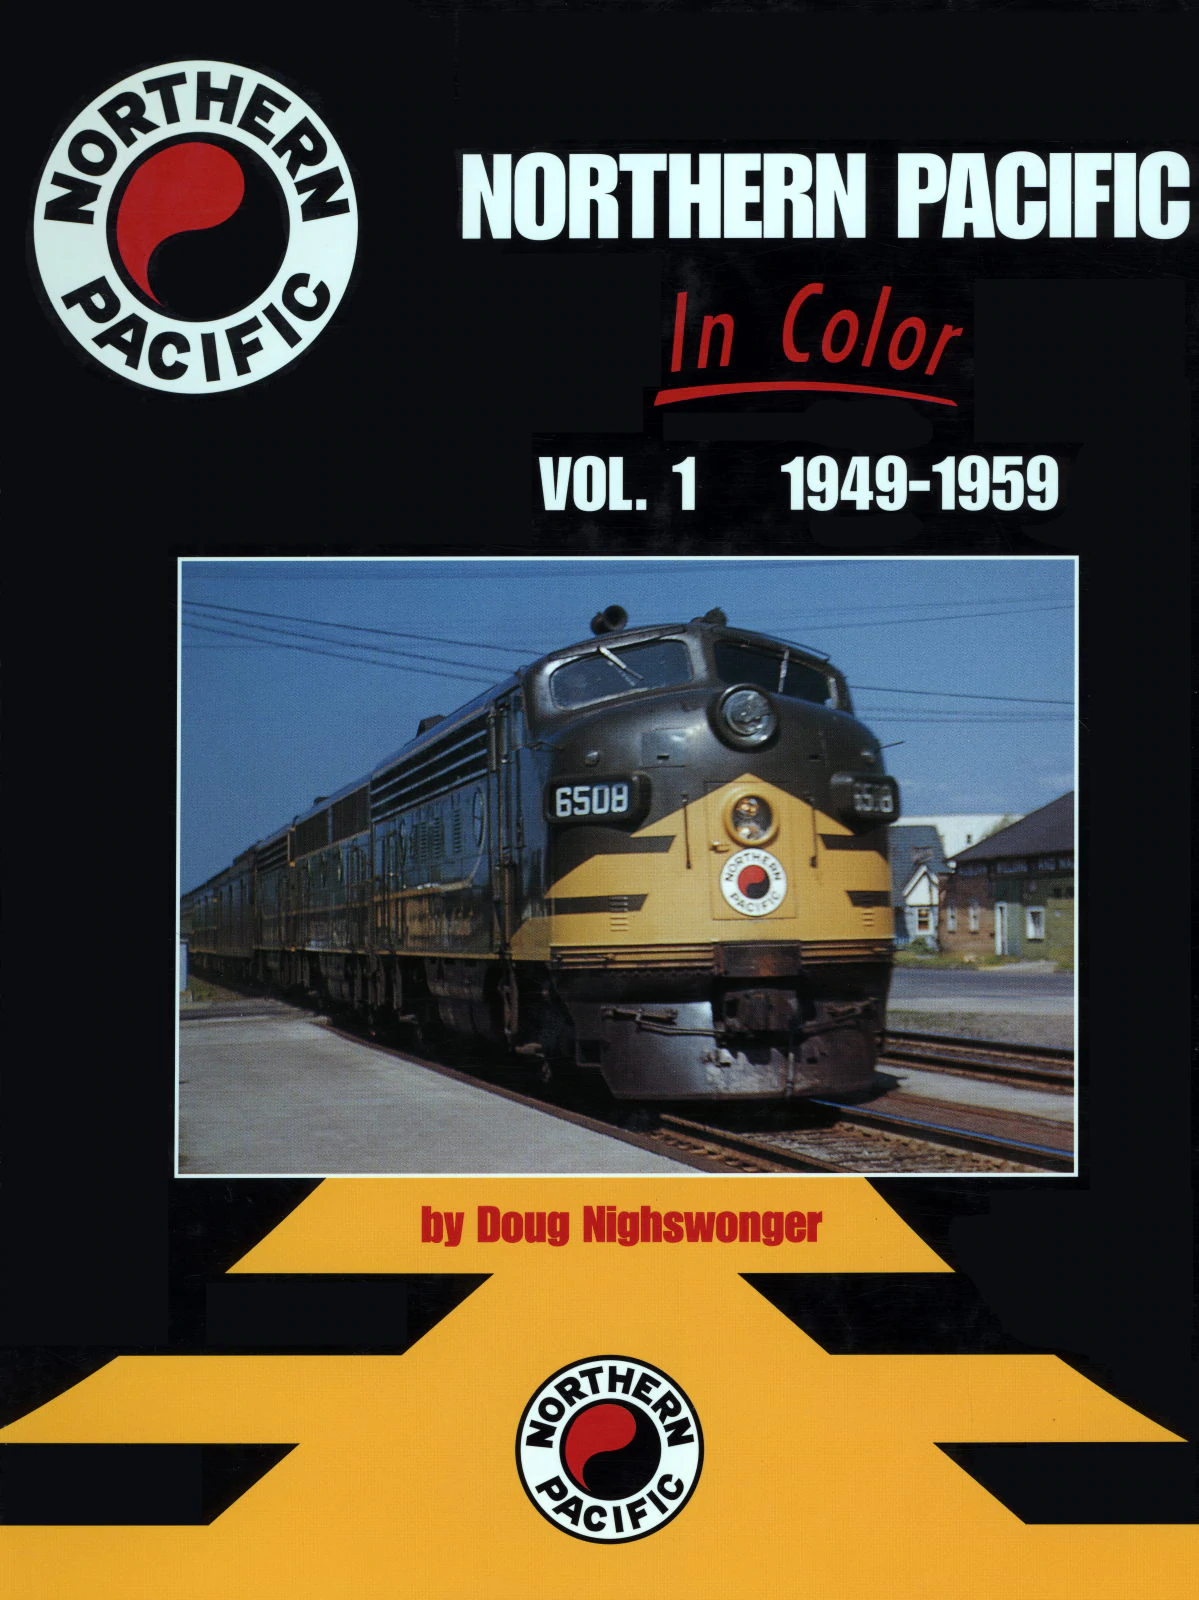 Northern Pacific In Color Volume 1: 1949-1959